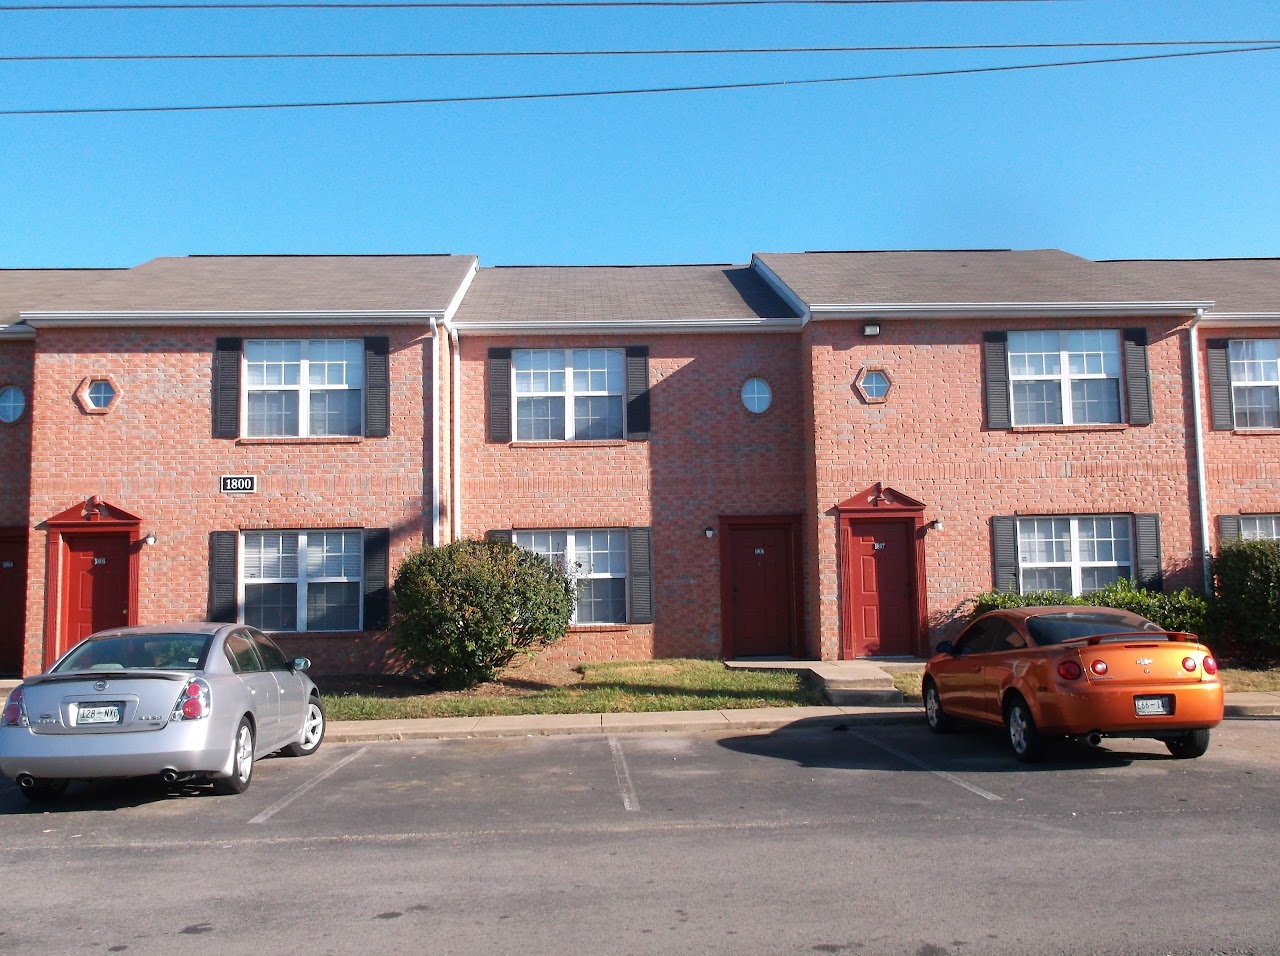 Photo of GREENTREE POINTE. Affordable housing located at 1640 WEST MAINE STREET LEBANON, TN 37087